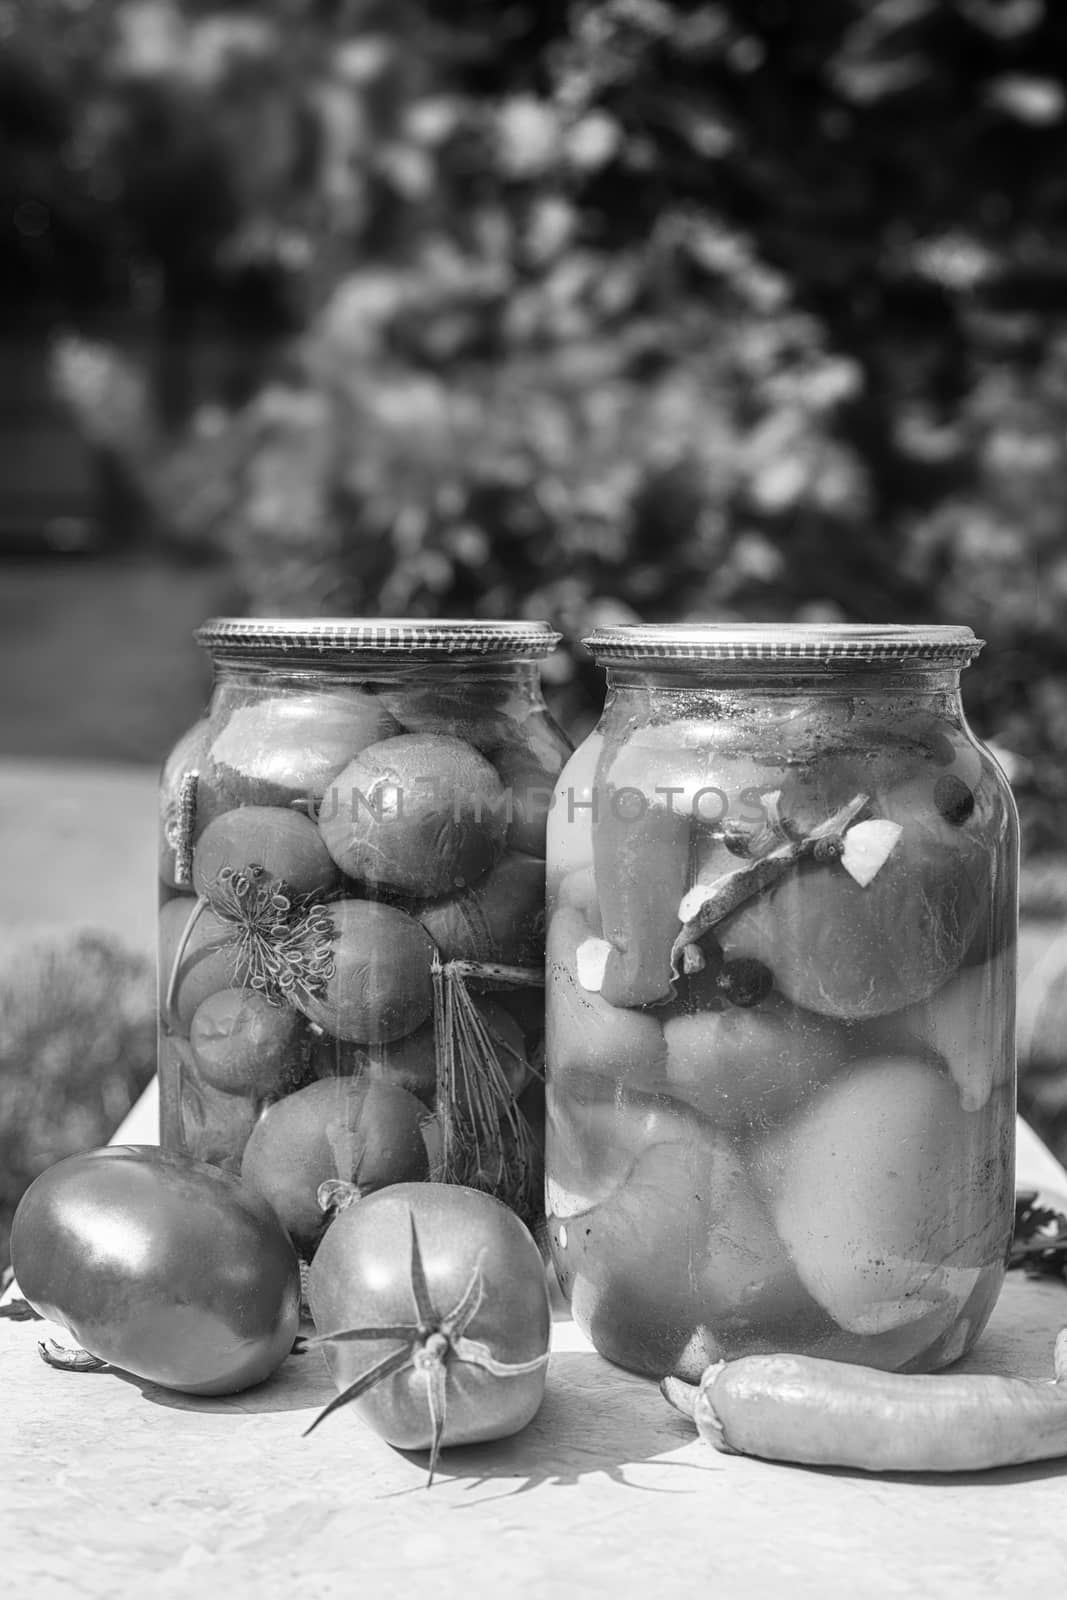 Canned tomatoes and peppers in glass jars. by georgina198